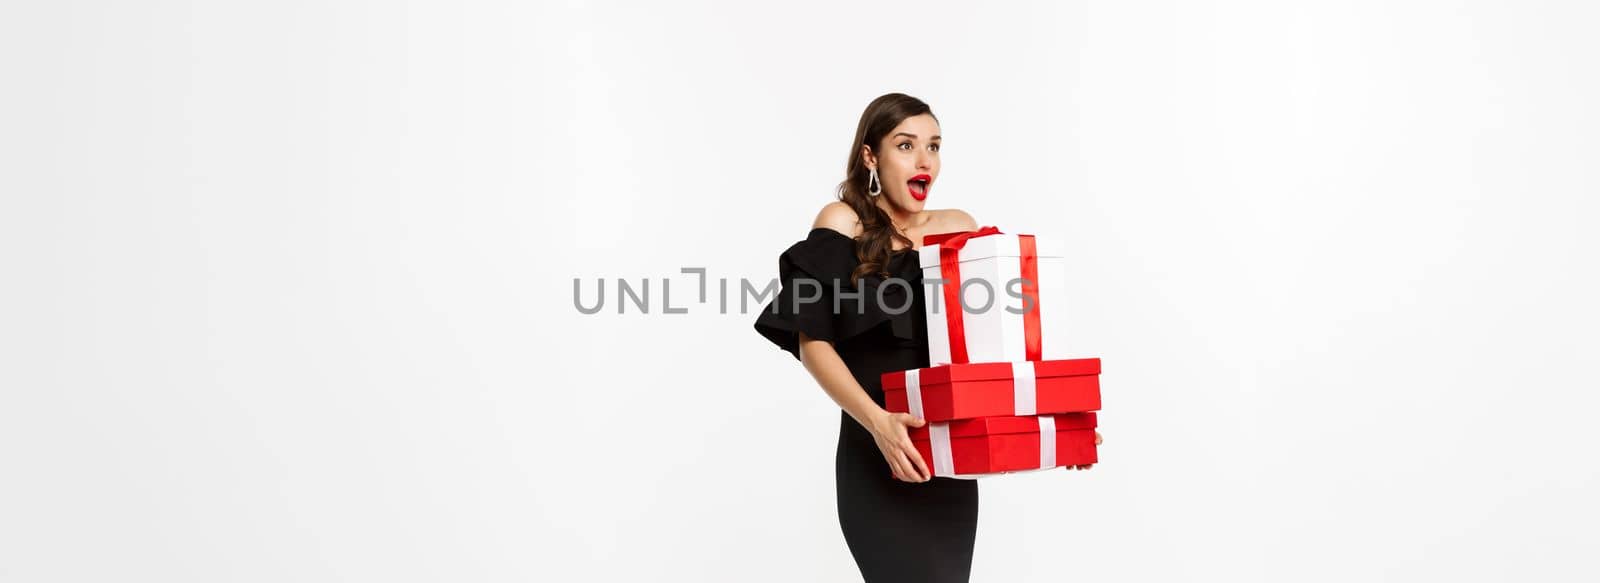 Merry christmas and new year holidays concept. Excited and happy woman in black dress holding xmas presents, looking surprised at logo. standing with presents against white background.